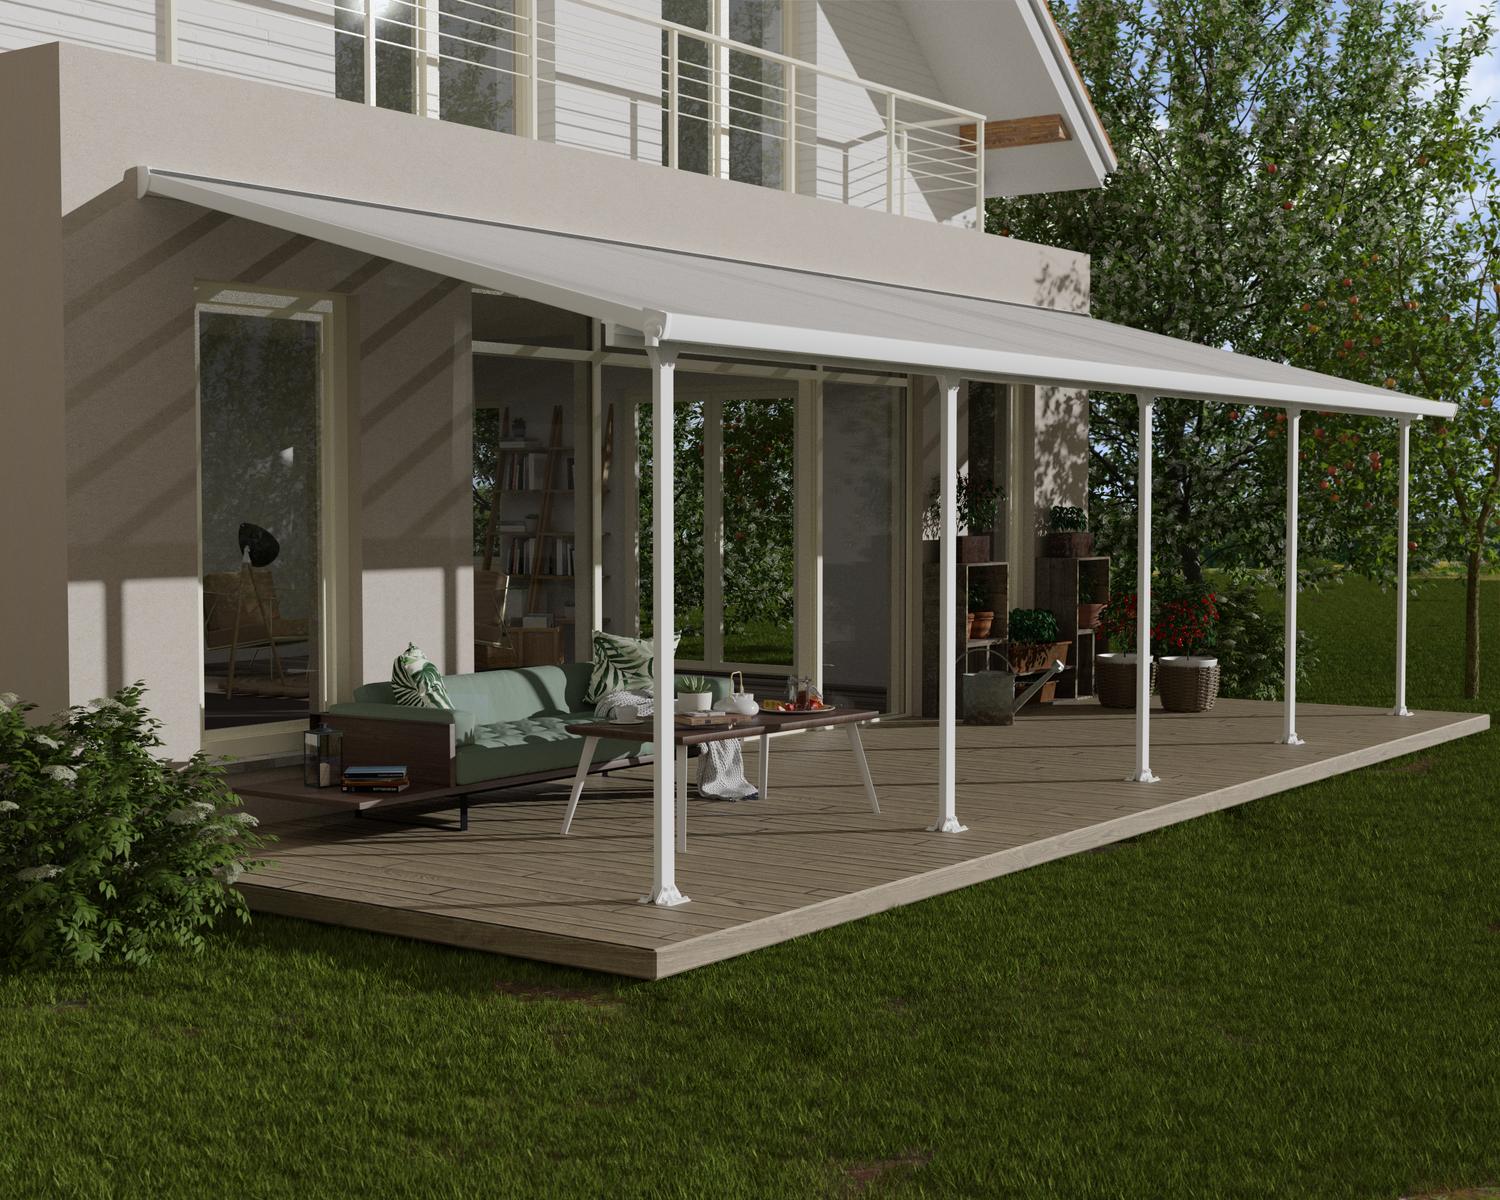 10 ft. x 30 ft. White Aluminum Patio Cover Attached to House on Balcony Patio